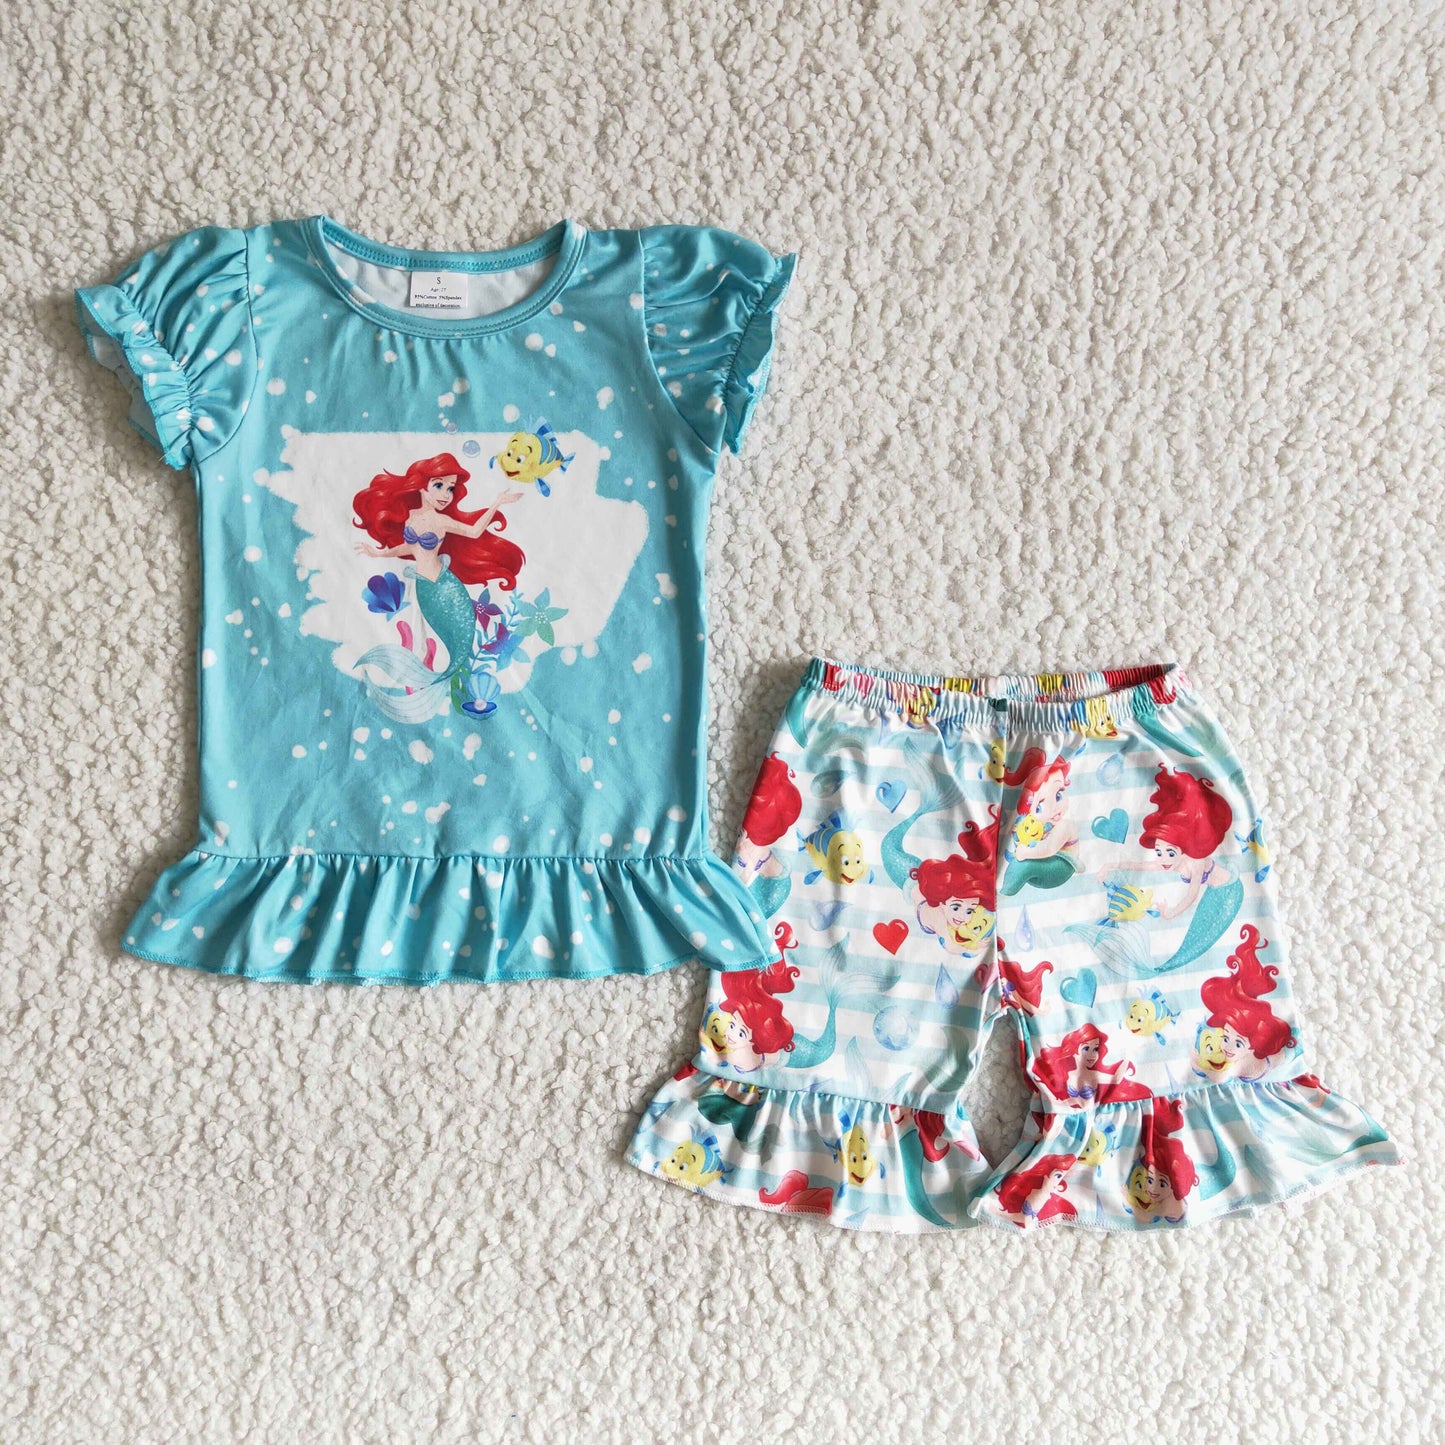 under the sea mermaid shorts outfit